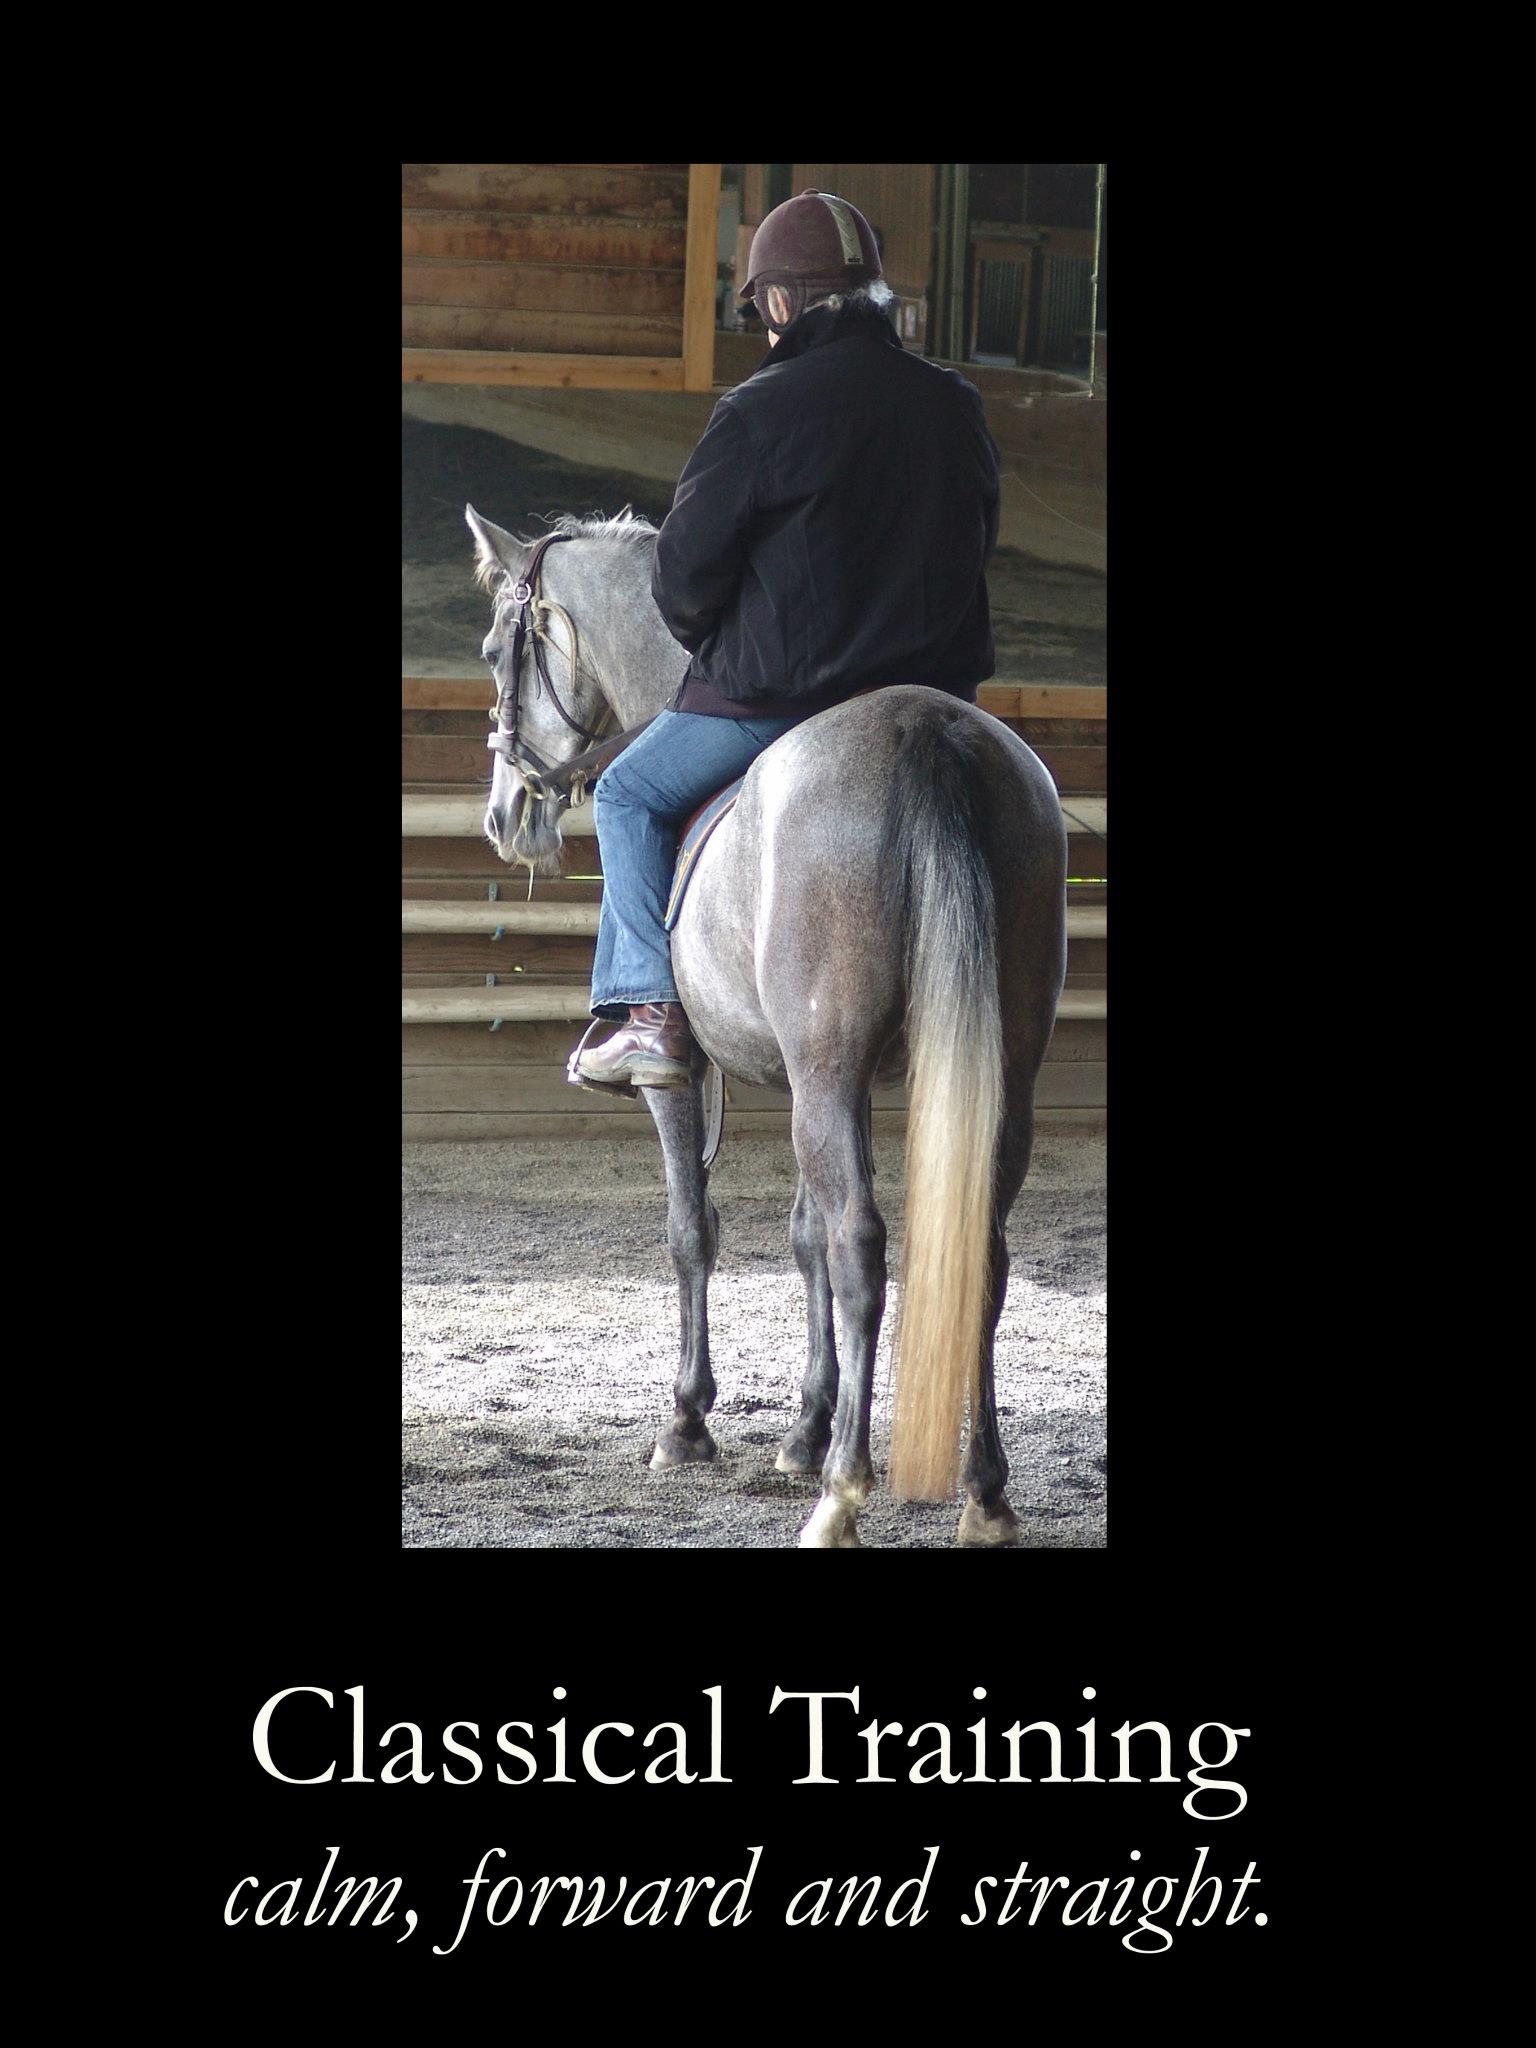 Finding it Foundation for the Equestrian Arts